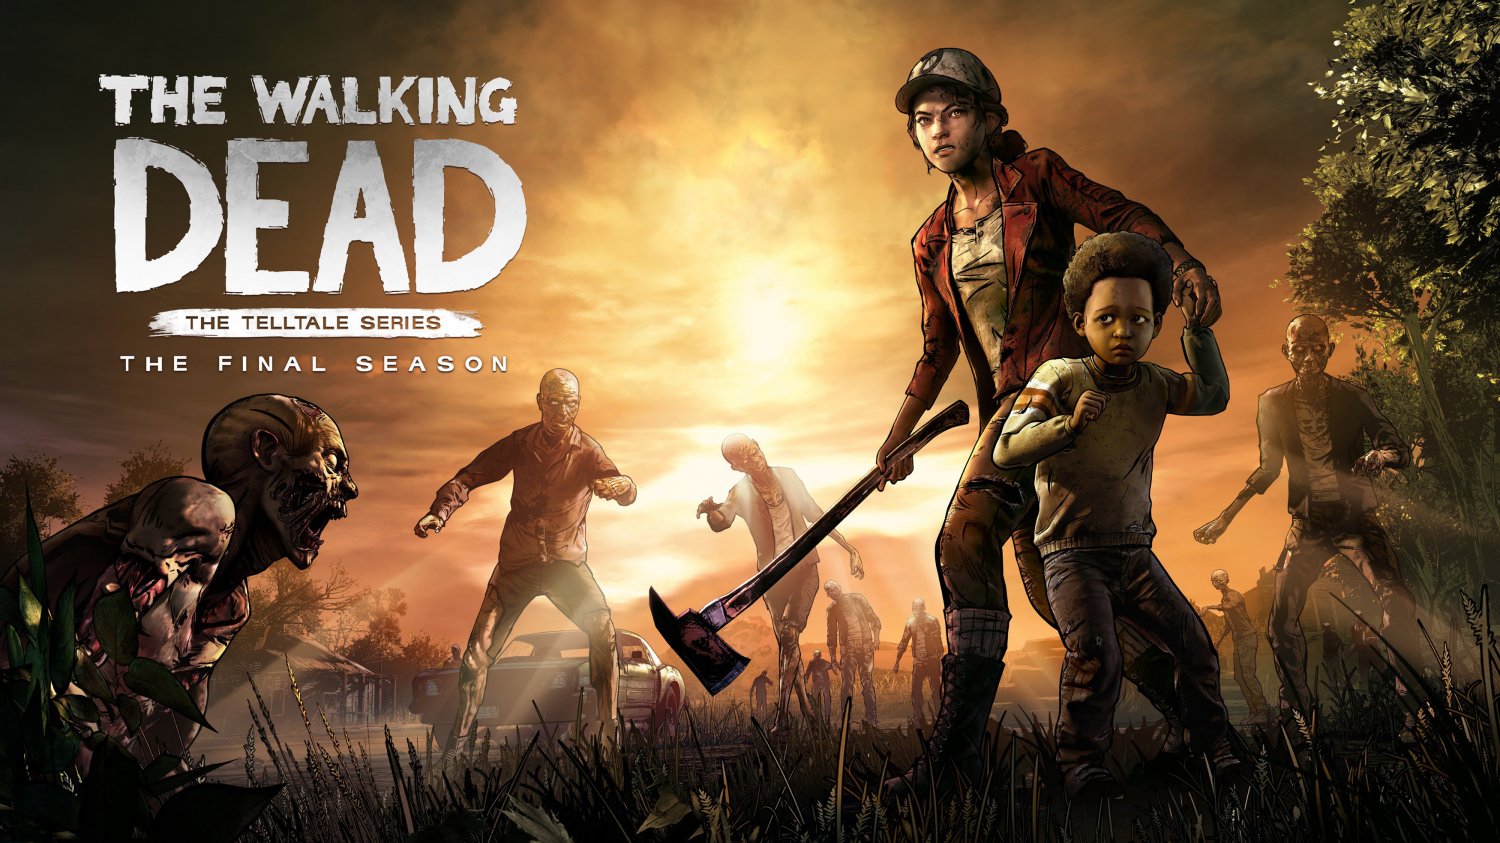 The Walking Dead Season 4 Clementine Telltale Game 13"x19" (32cm/49cm) Polyester Fabric Poster